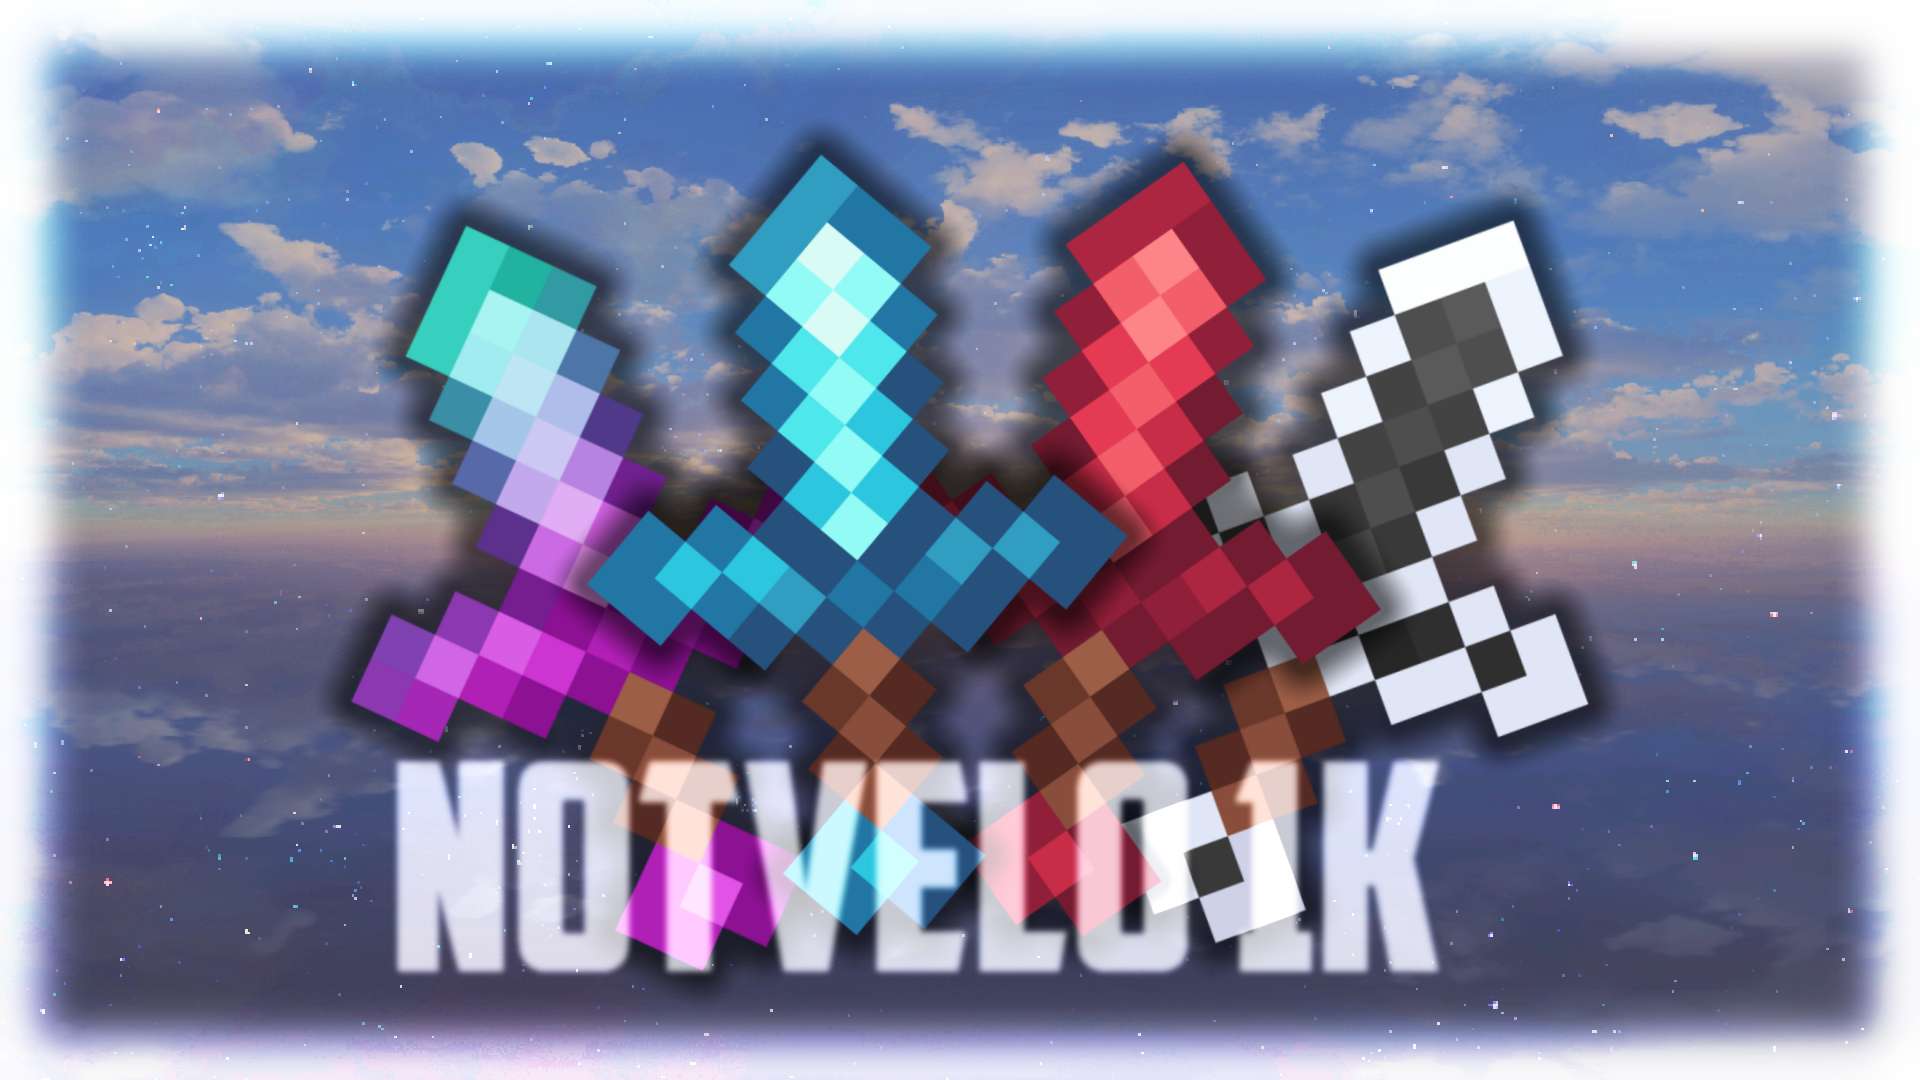 NotVelo 1k - Default 16 by Zlax on PvPRP